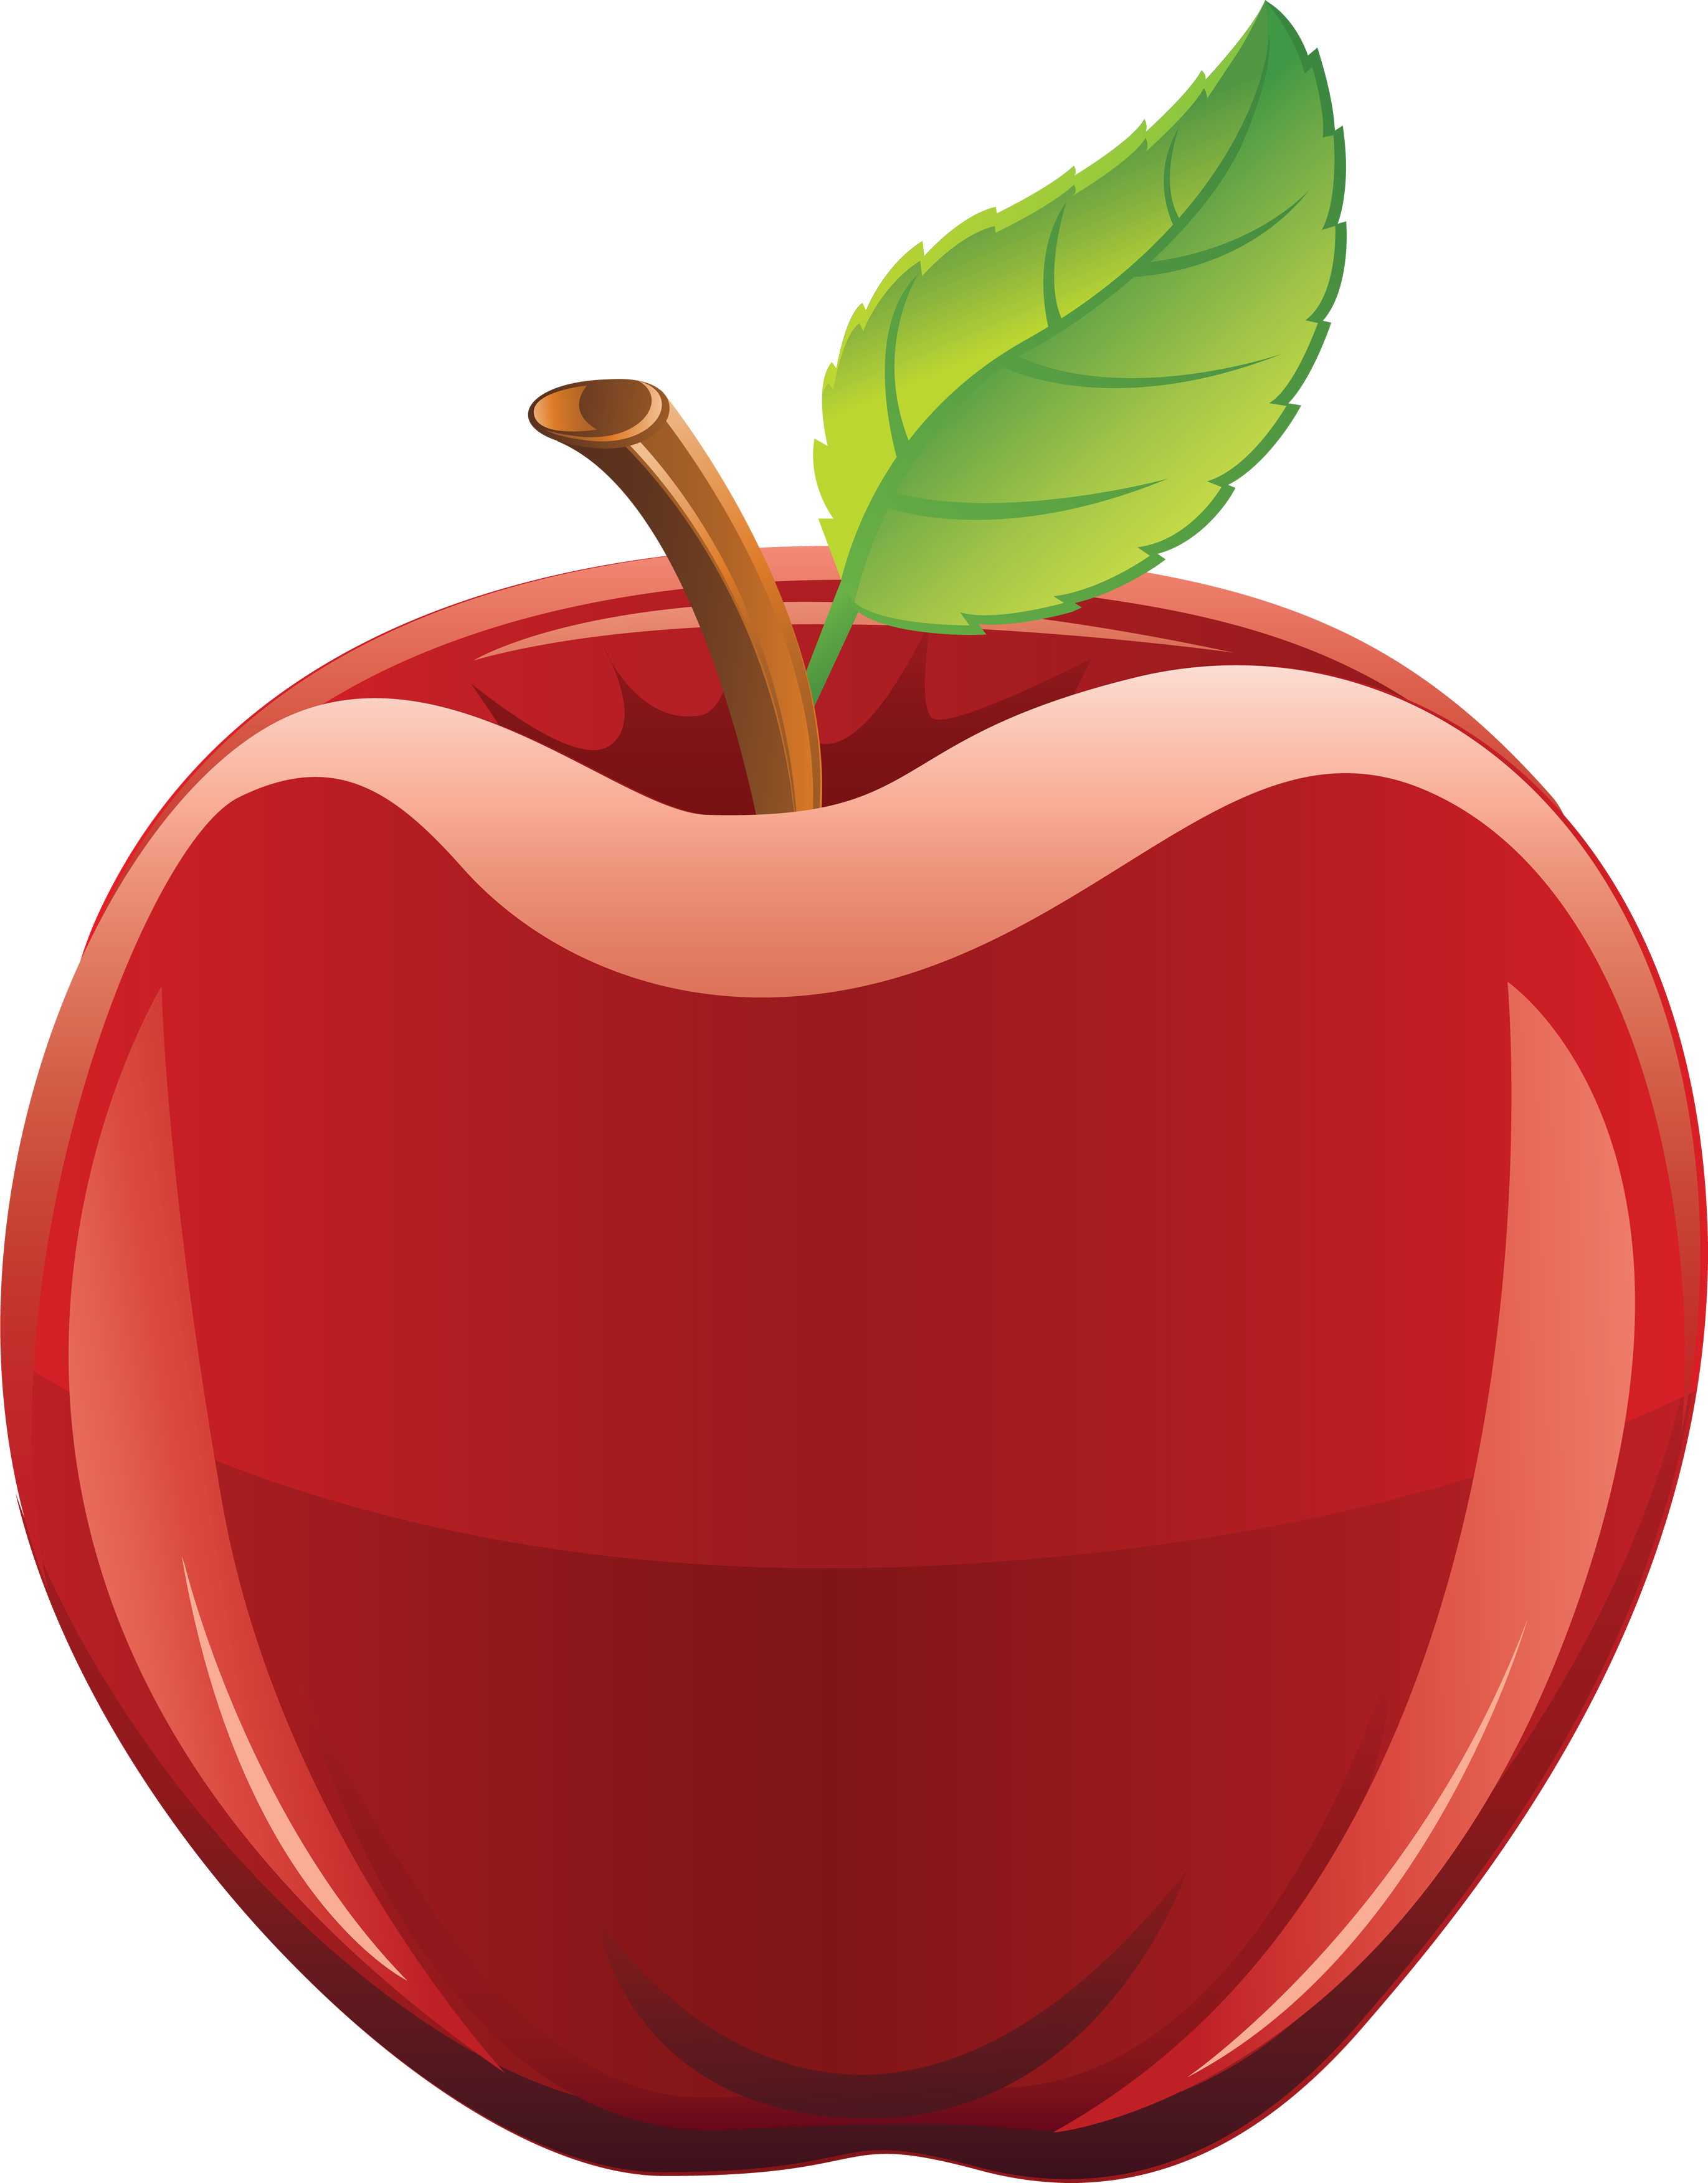 Clip art red apple red apple clipart cliparts for you - Cliparting.com